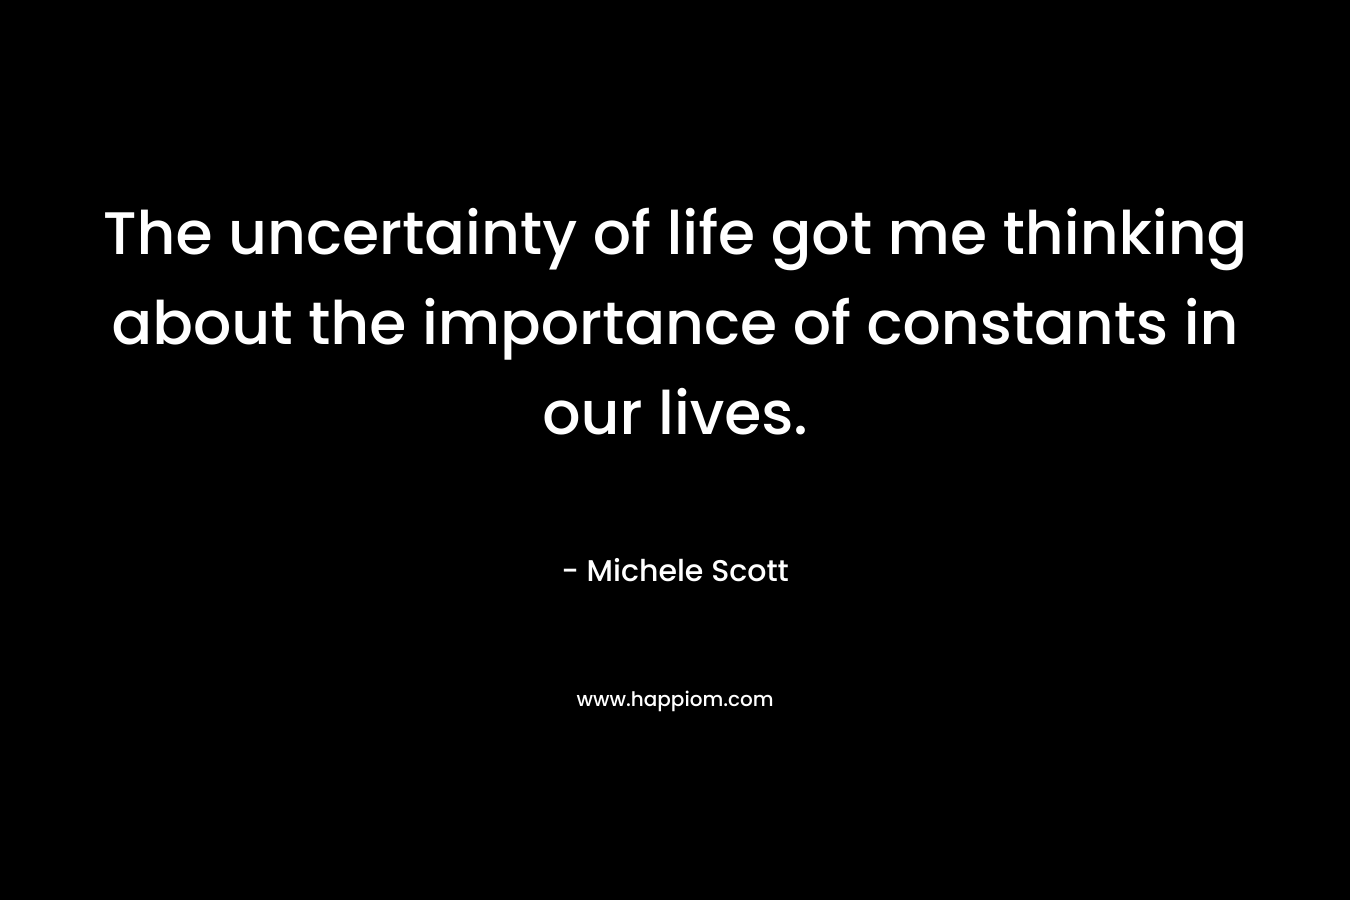 The uncertainty of life got me thinking about the importance of constants in our lives.